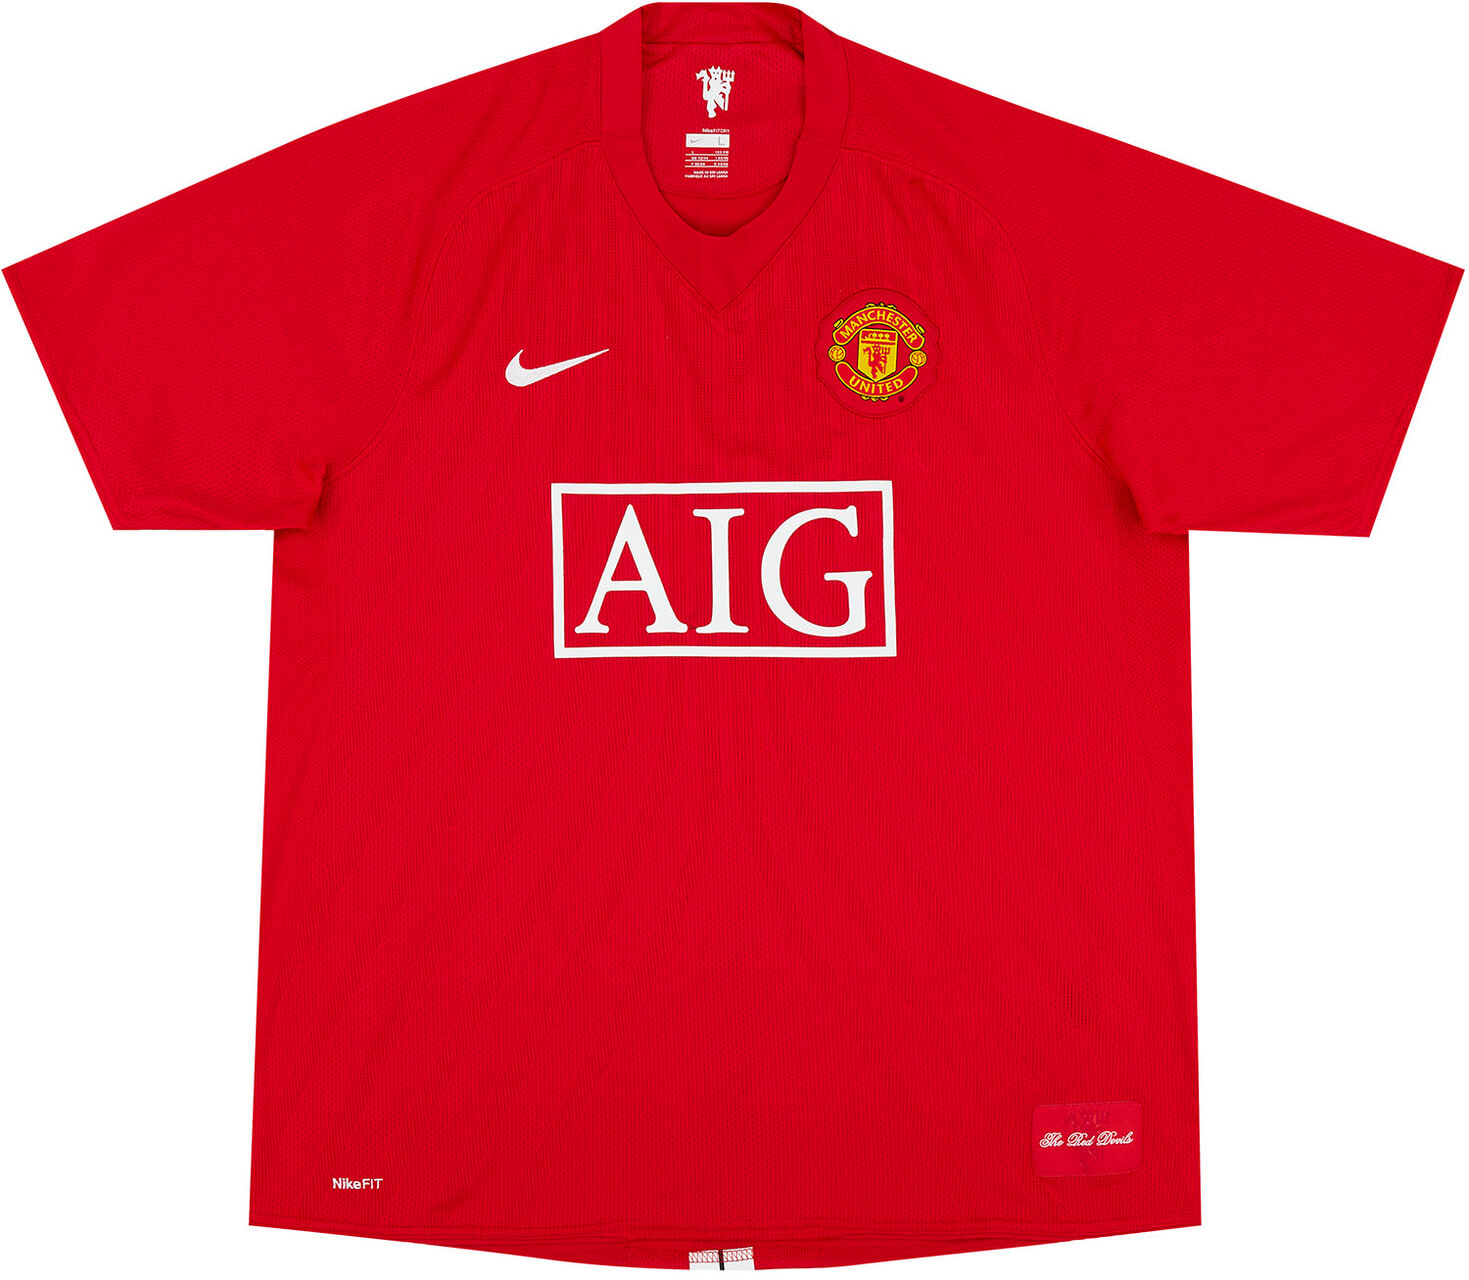 2007-09 Manchester United Home Shirt - 9/10 - ()